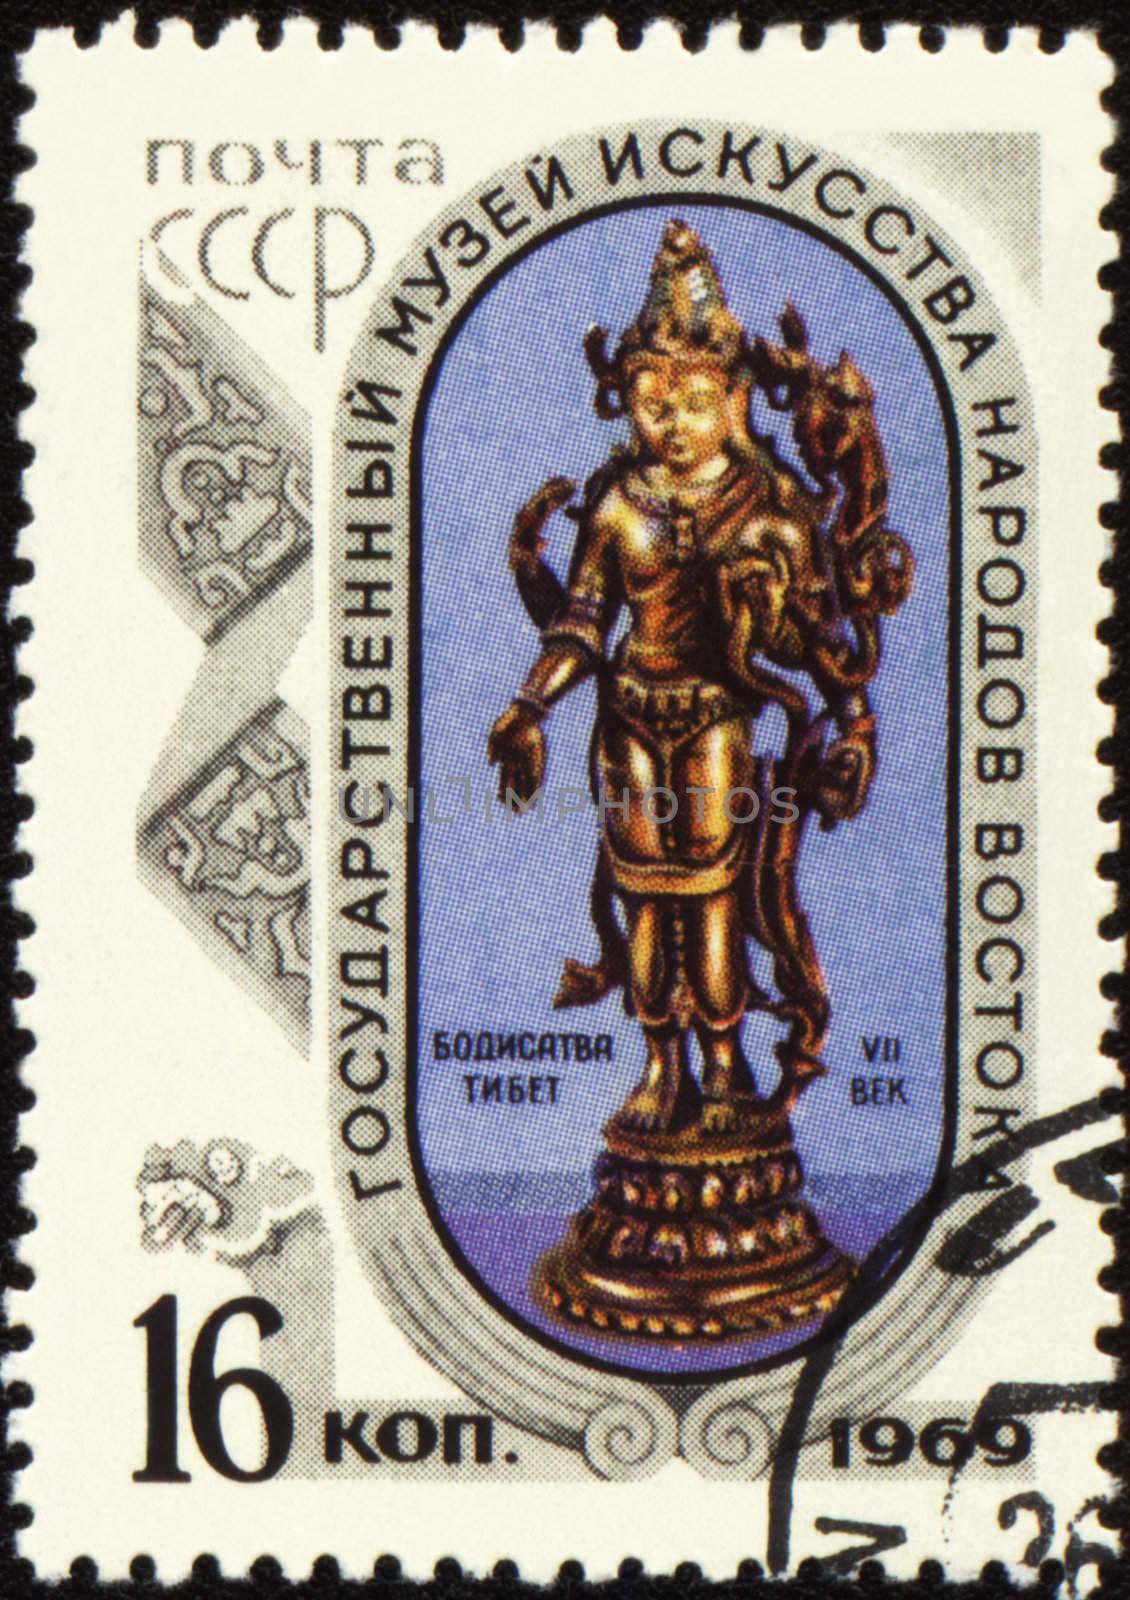 USSR - CIRCA 1969: A stamp printed in the USSR shows ancient statuette of Bodhisattva (Tibet, 7th century), series Museum of Oriental Art, circa 1969